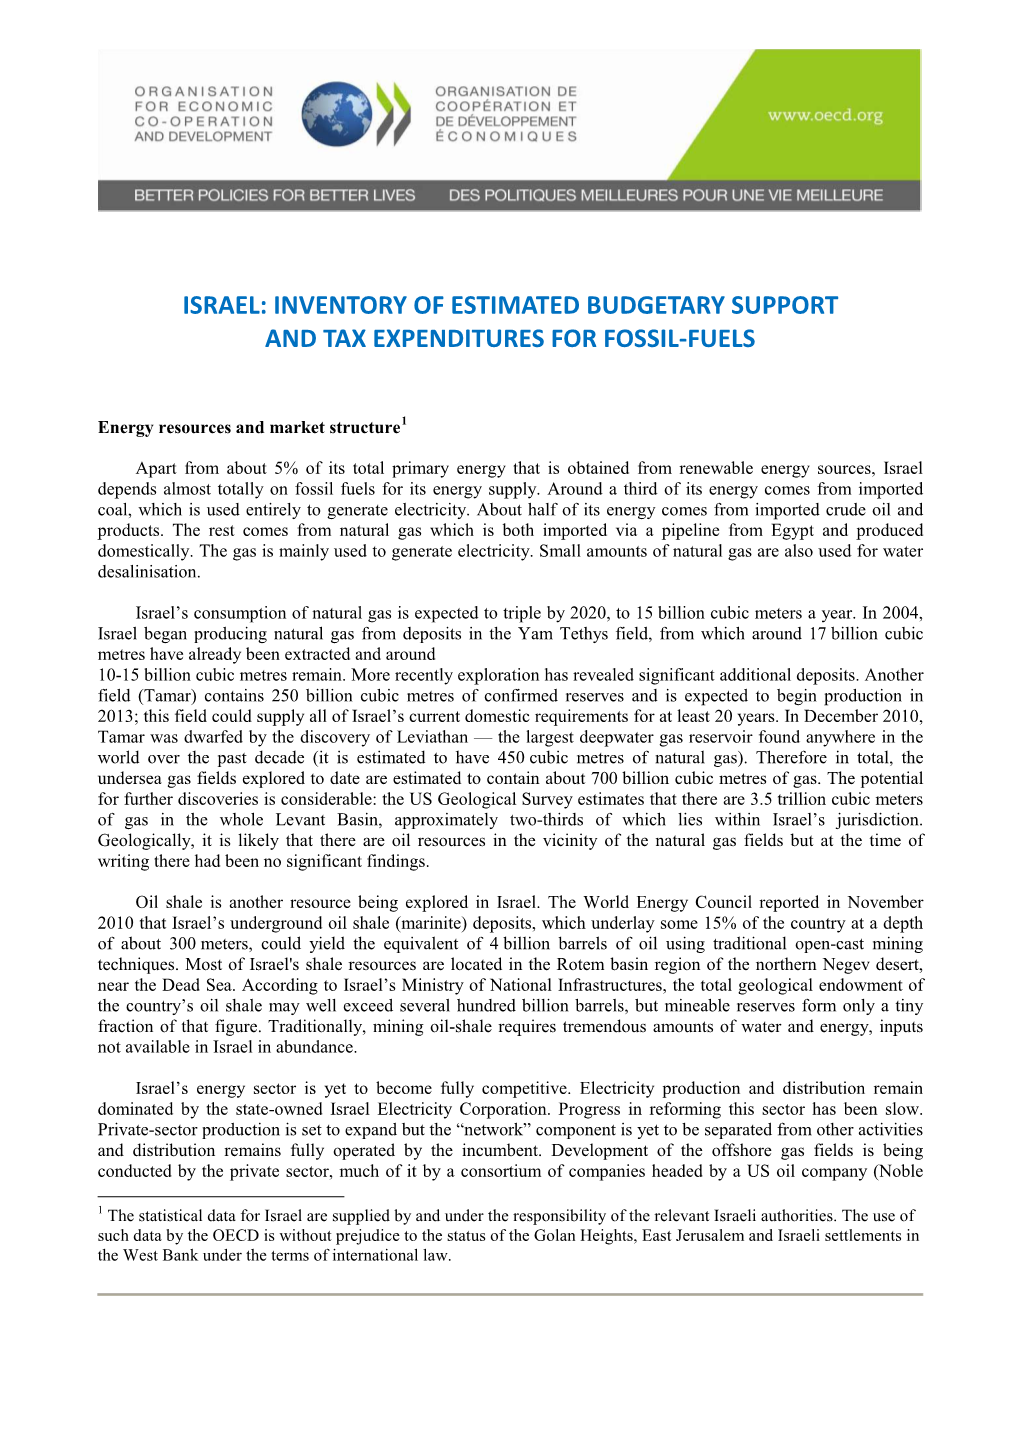 Israel: Inventory of Estimated Budgetary Support and Tax Expenditures for Fossil-Fuels